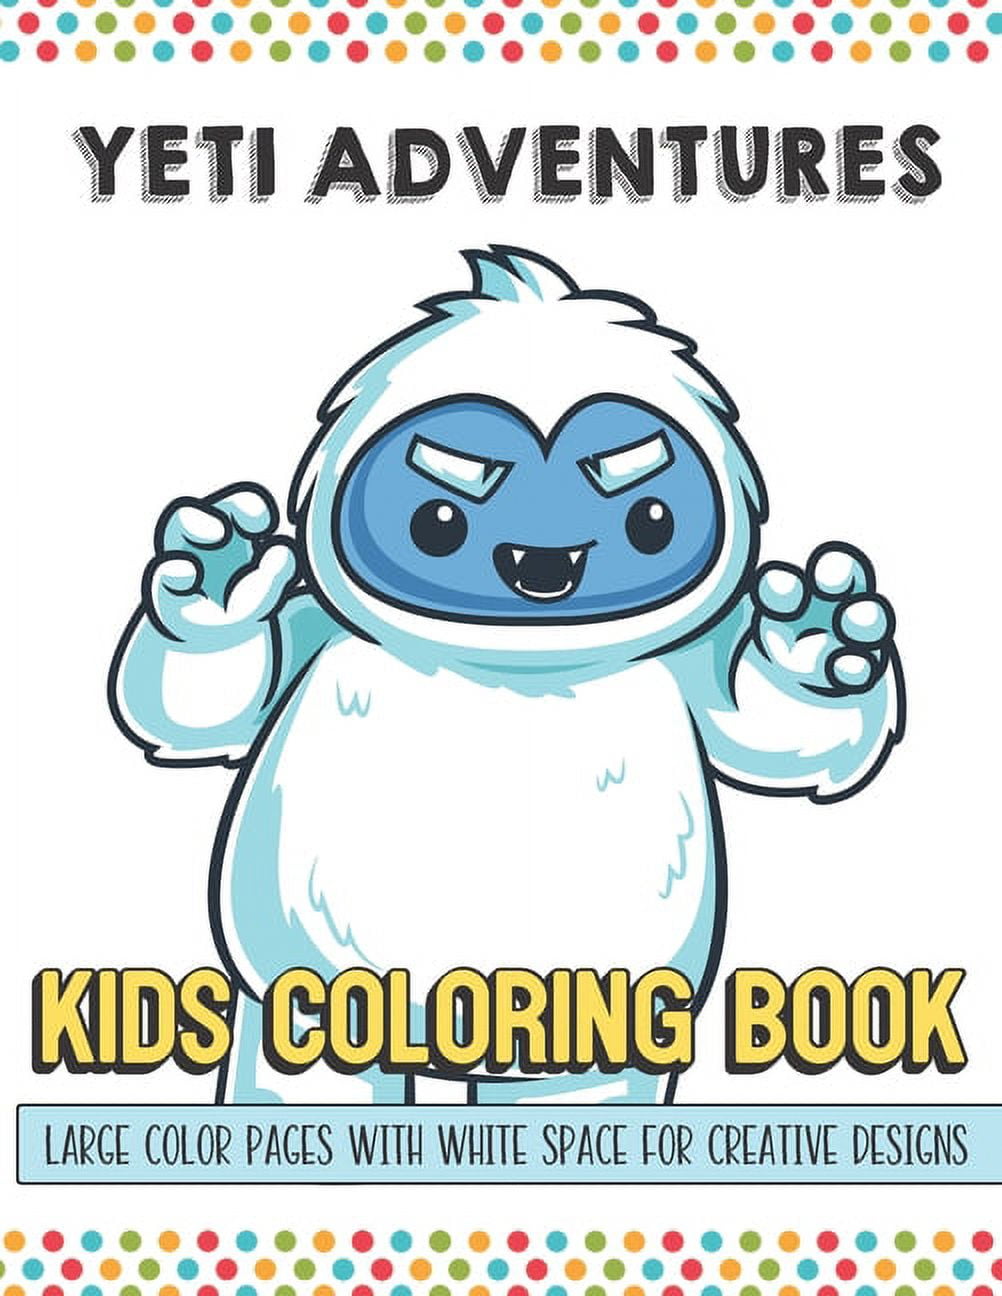 Yeti adventures kids coloring book large color pages with white space for creative designs activity book for children to inspire creativity and mindfulness when at home or while at school great